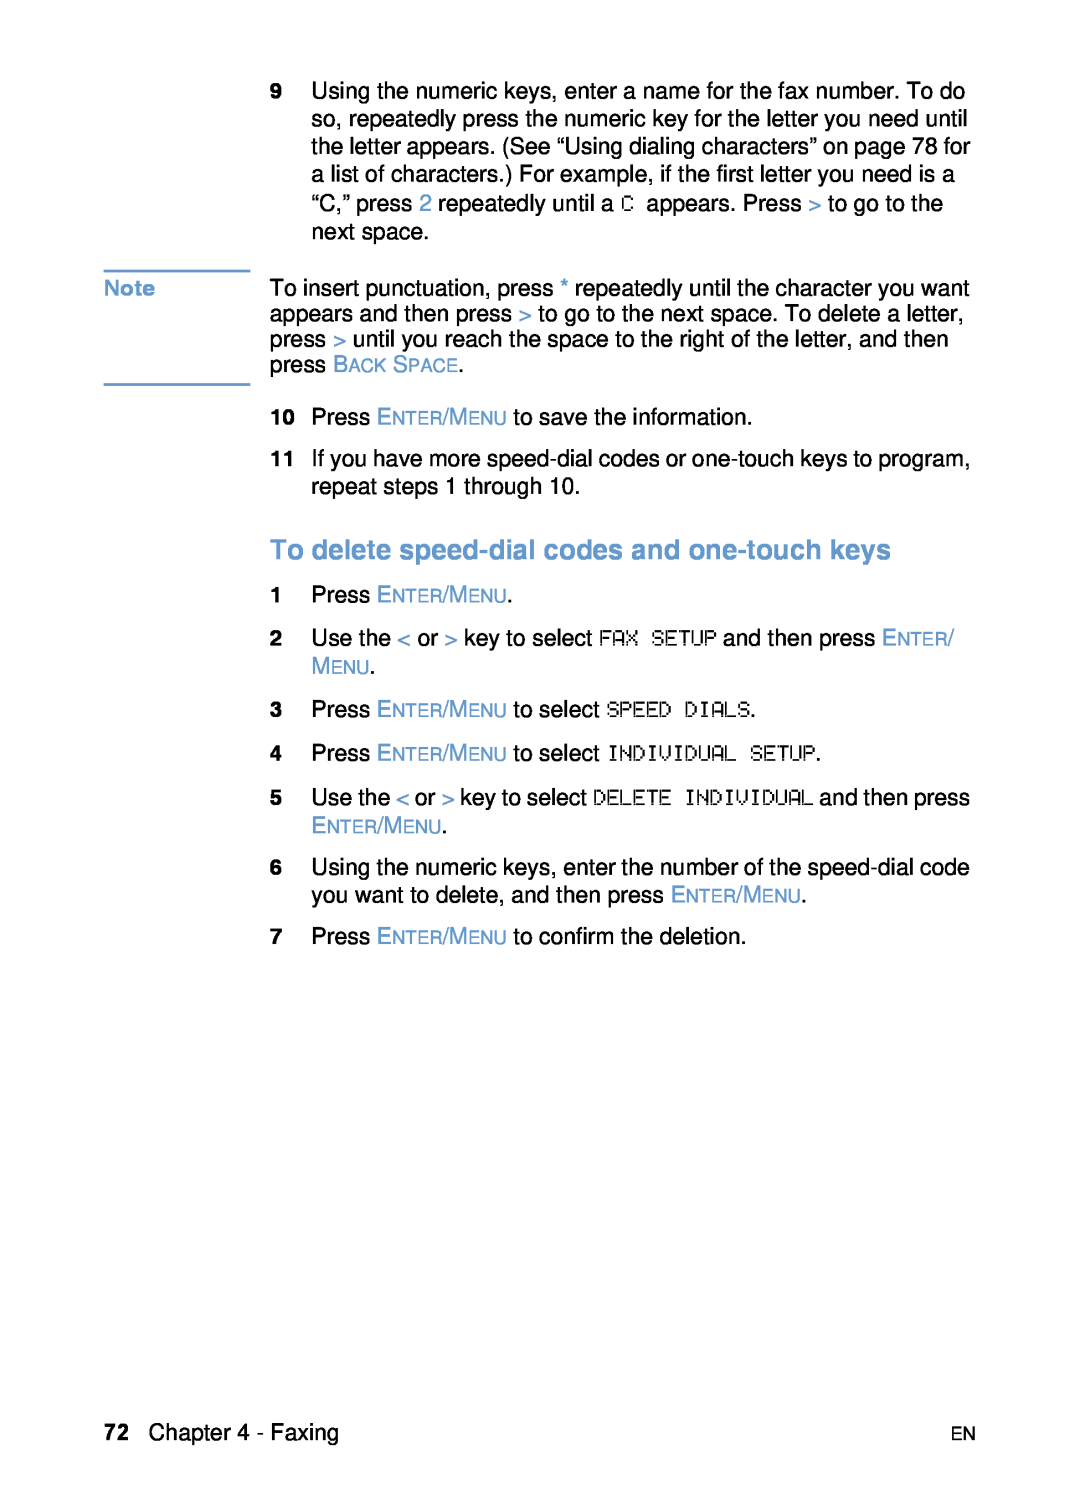 HP 3200 manual To delete speed-dial codes and one-touch keys 